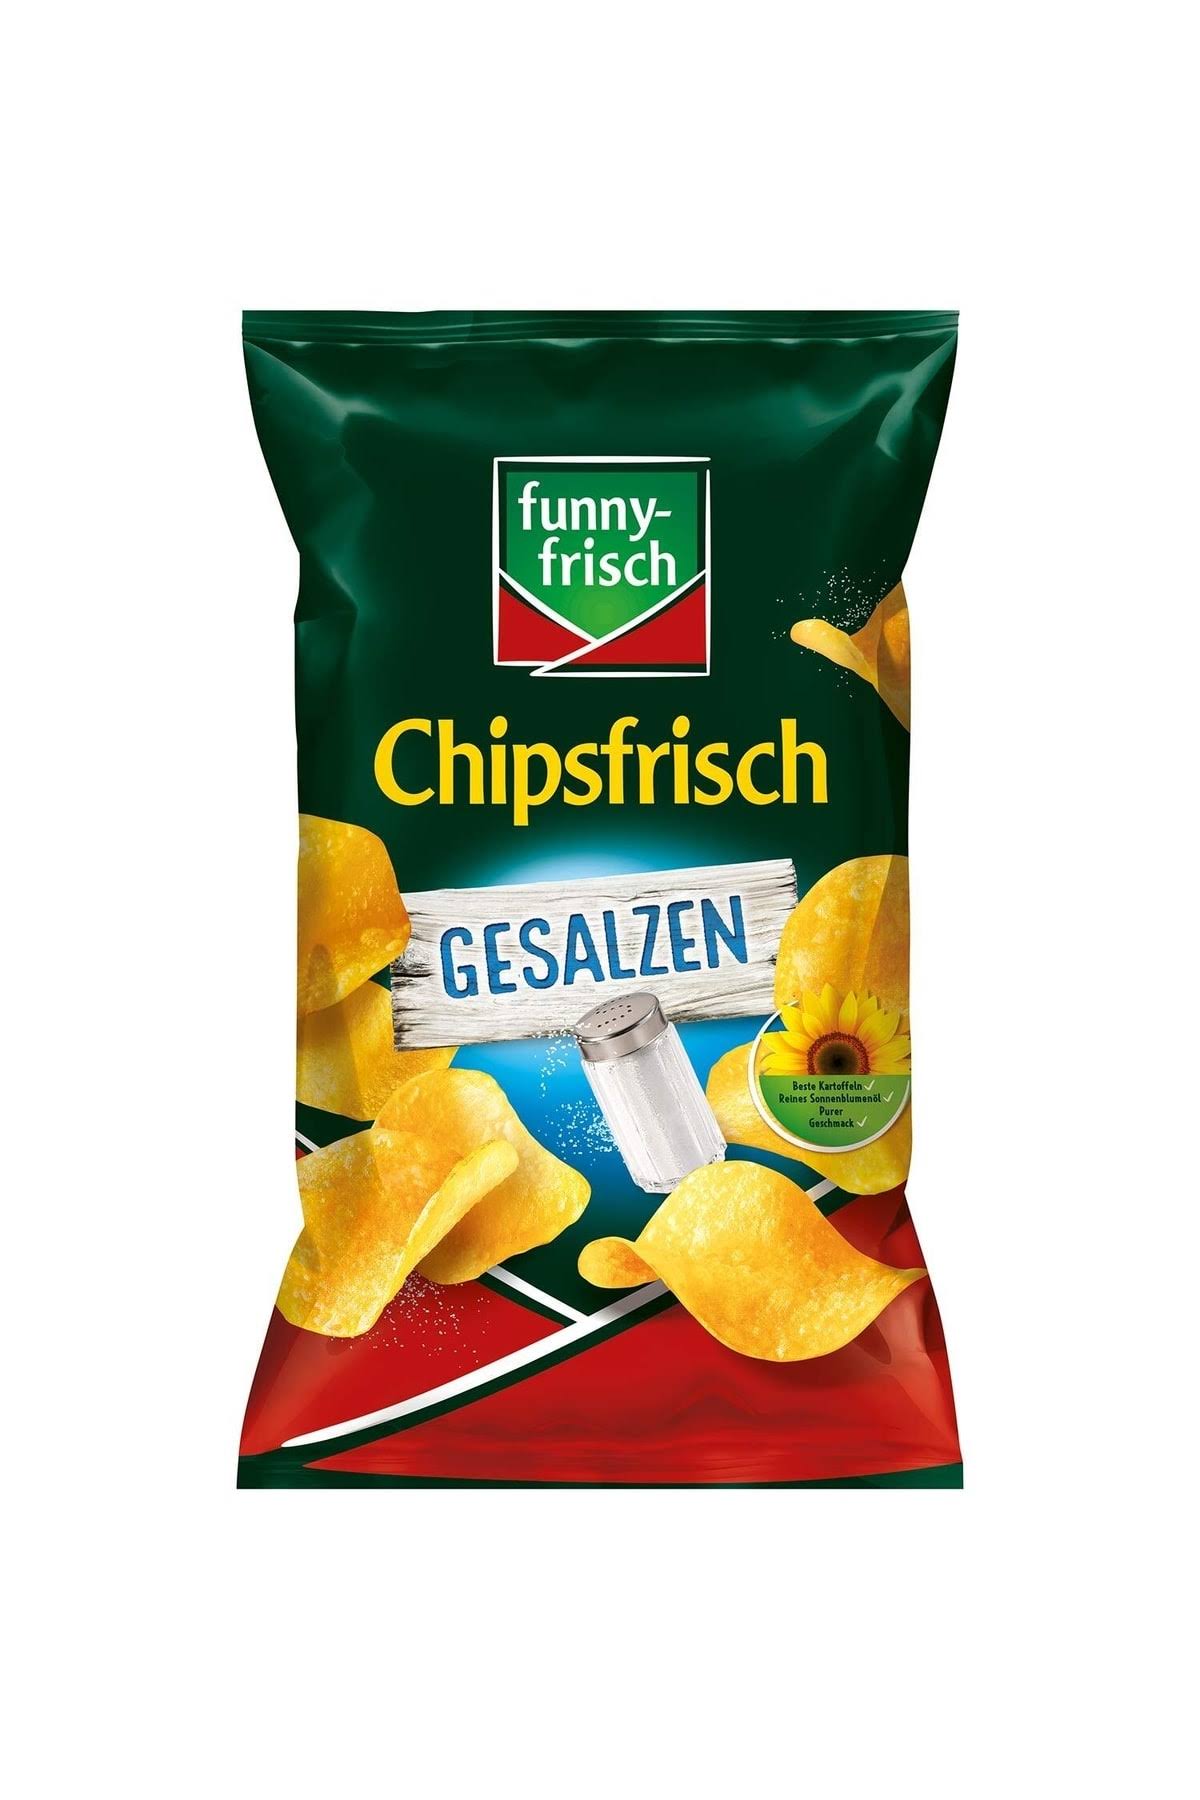 Funny Frisch Chipsfrisch Salted 175g / 6.17 oz - from Germany 4003586000385